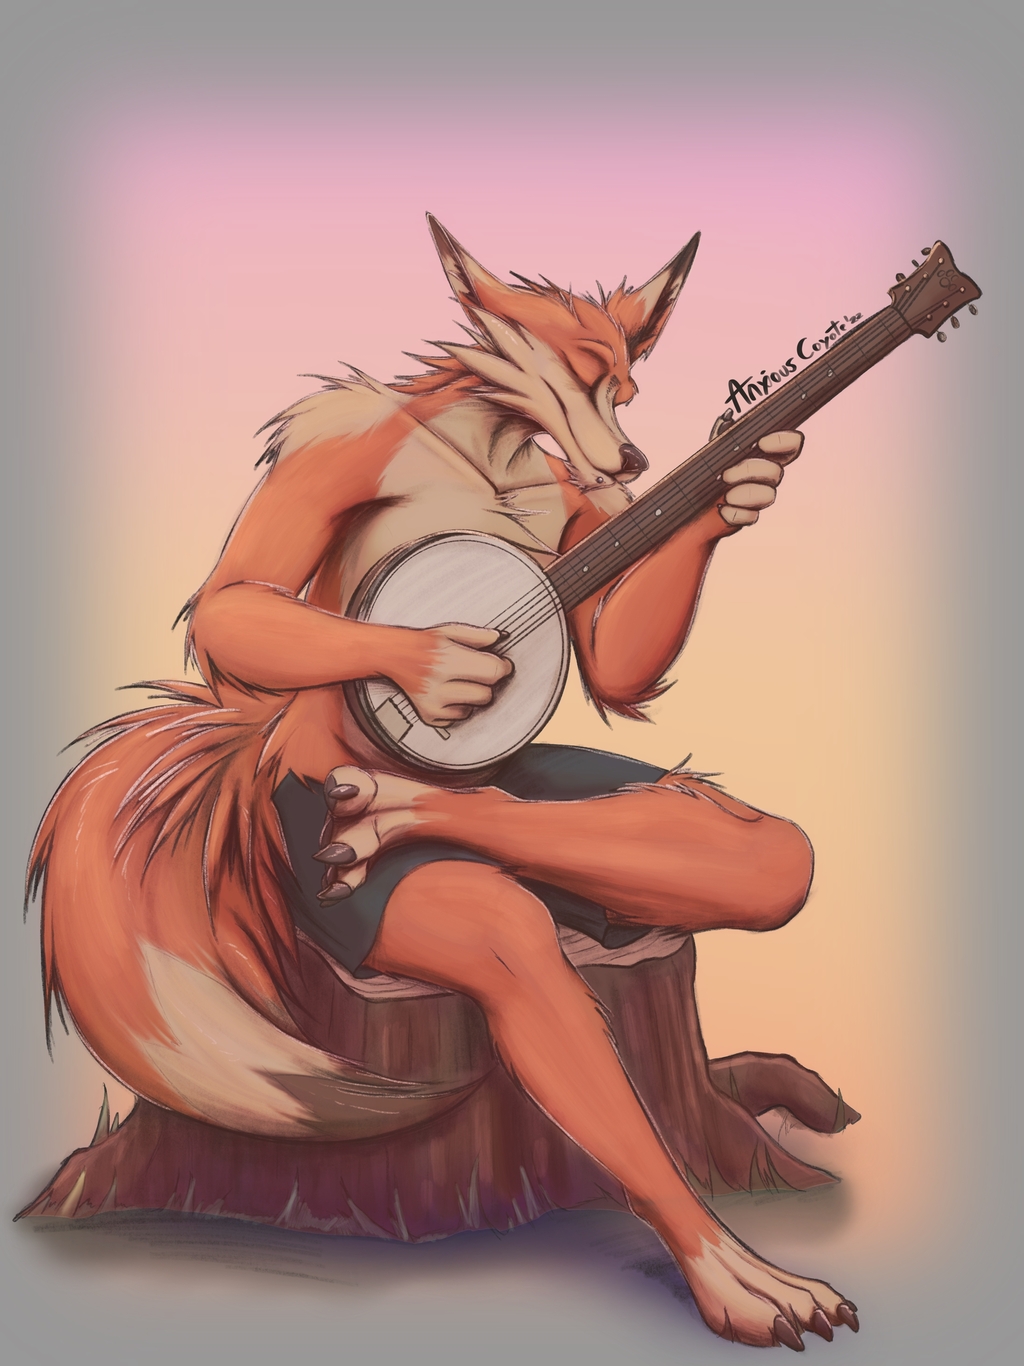 Most recent image: Fox Playing A Banjo